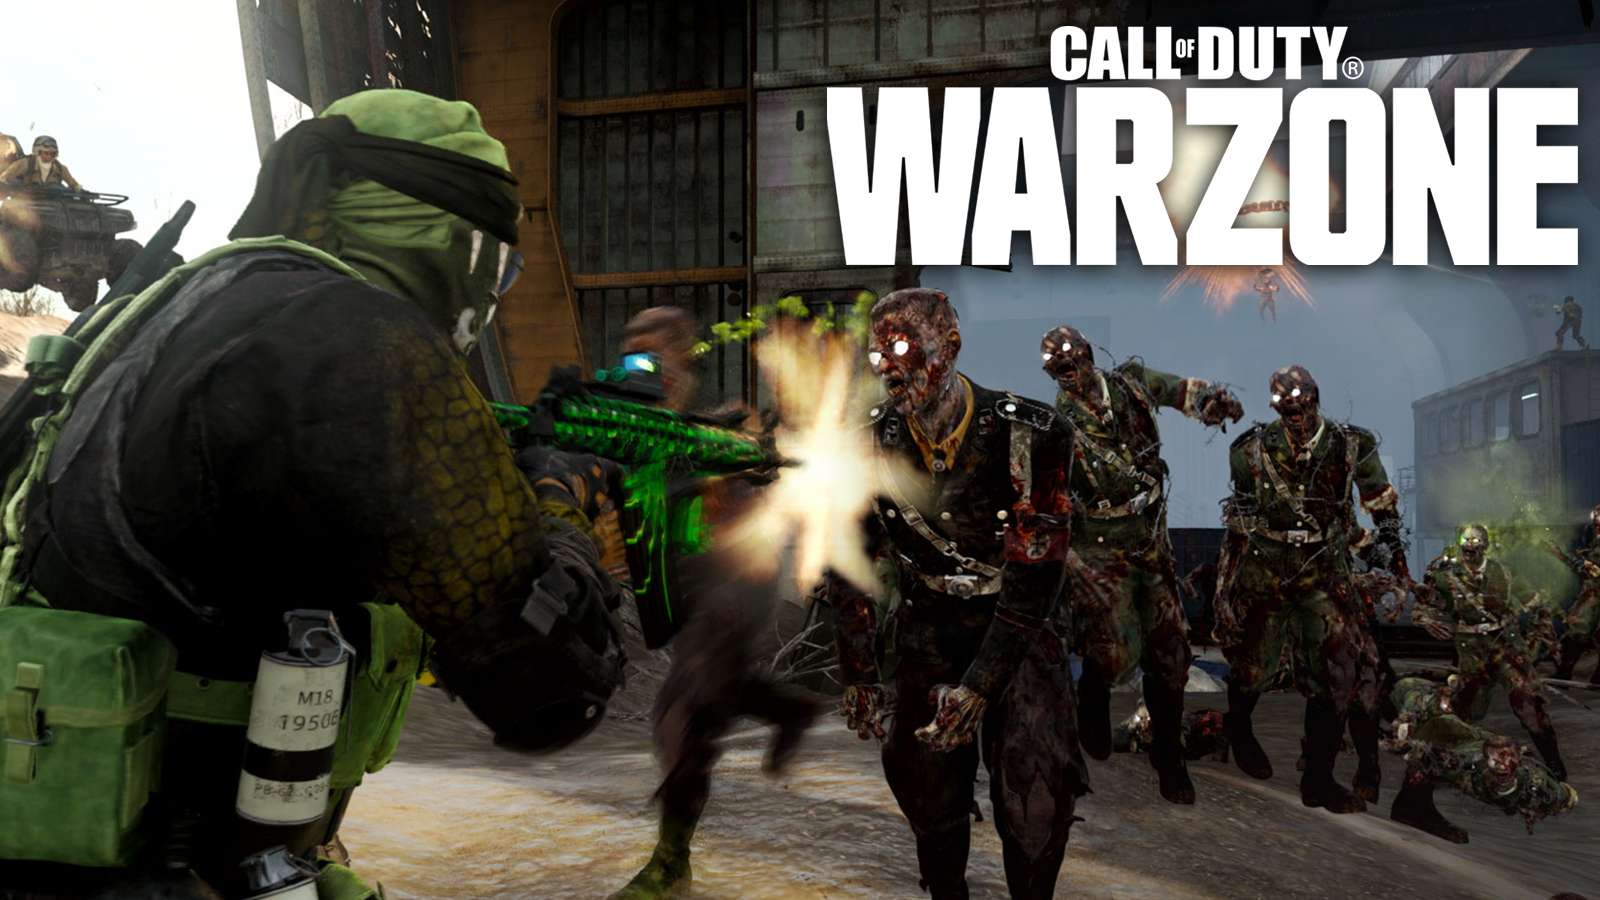 Zombies in Warzone